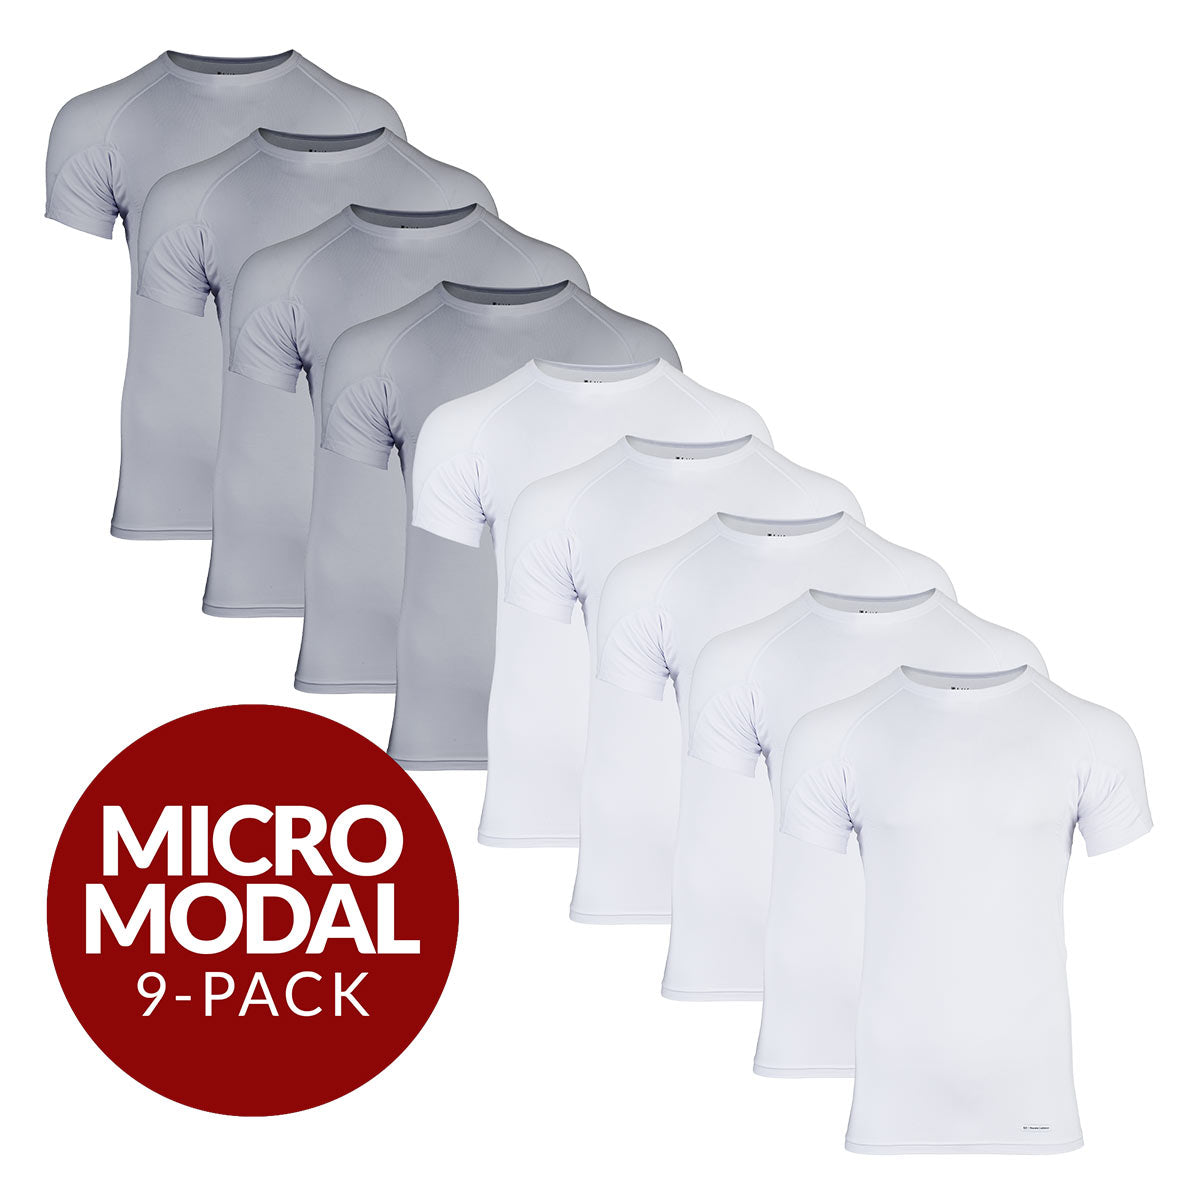 Crew Neck Micro Modal Sweat Proof Undershirt For Men - Mix 9-Pack (5x White, 4x Grey) - Ejis